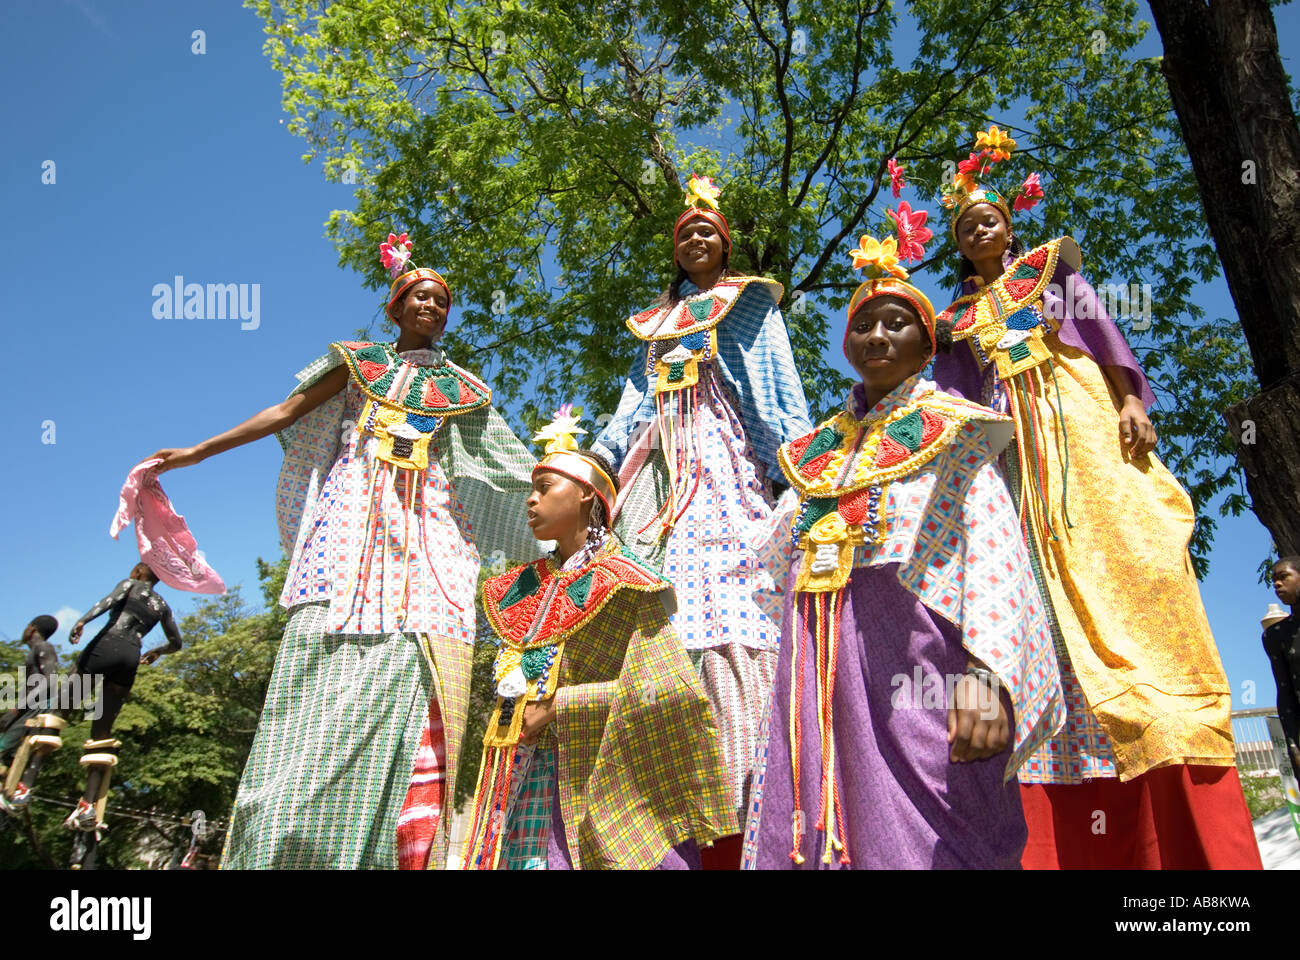 West Indies Trinidad Carnival Port of Spain Teenagers on stilts wearing colorful costumes Kiddies carnival parade. Stock Photo